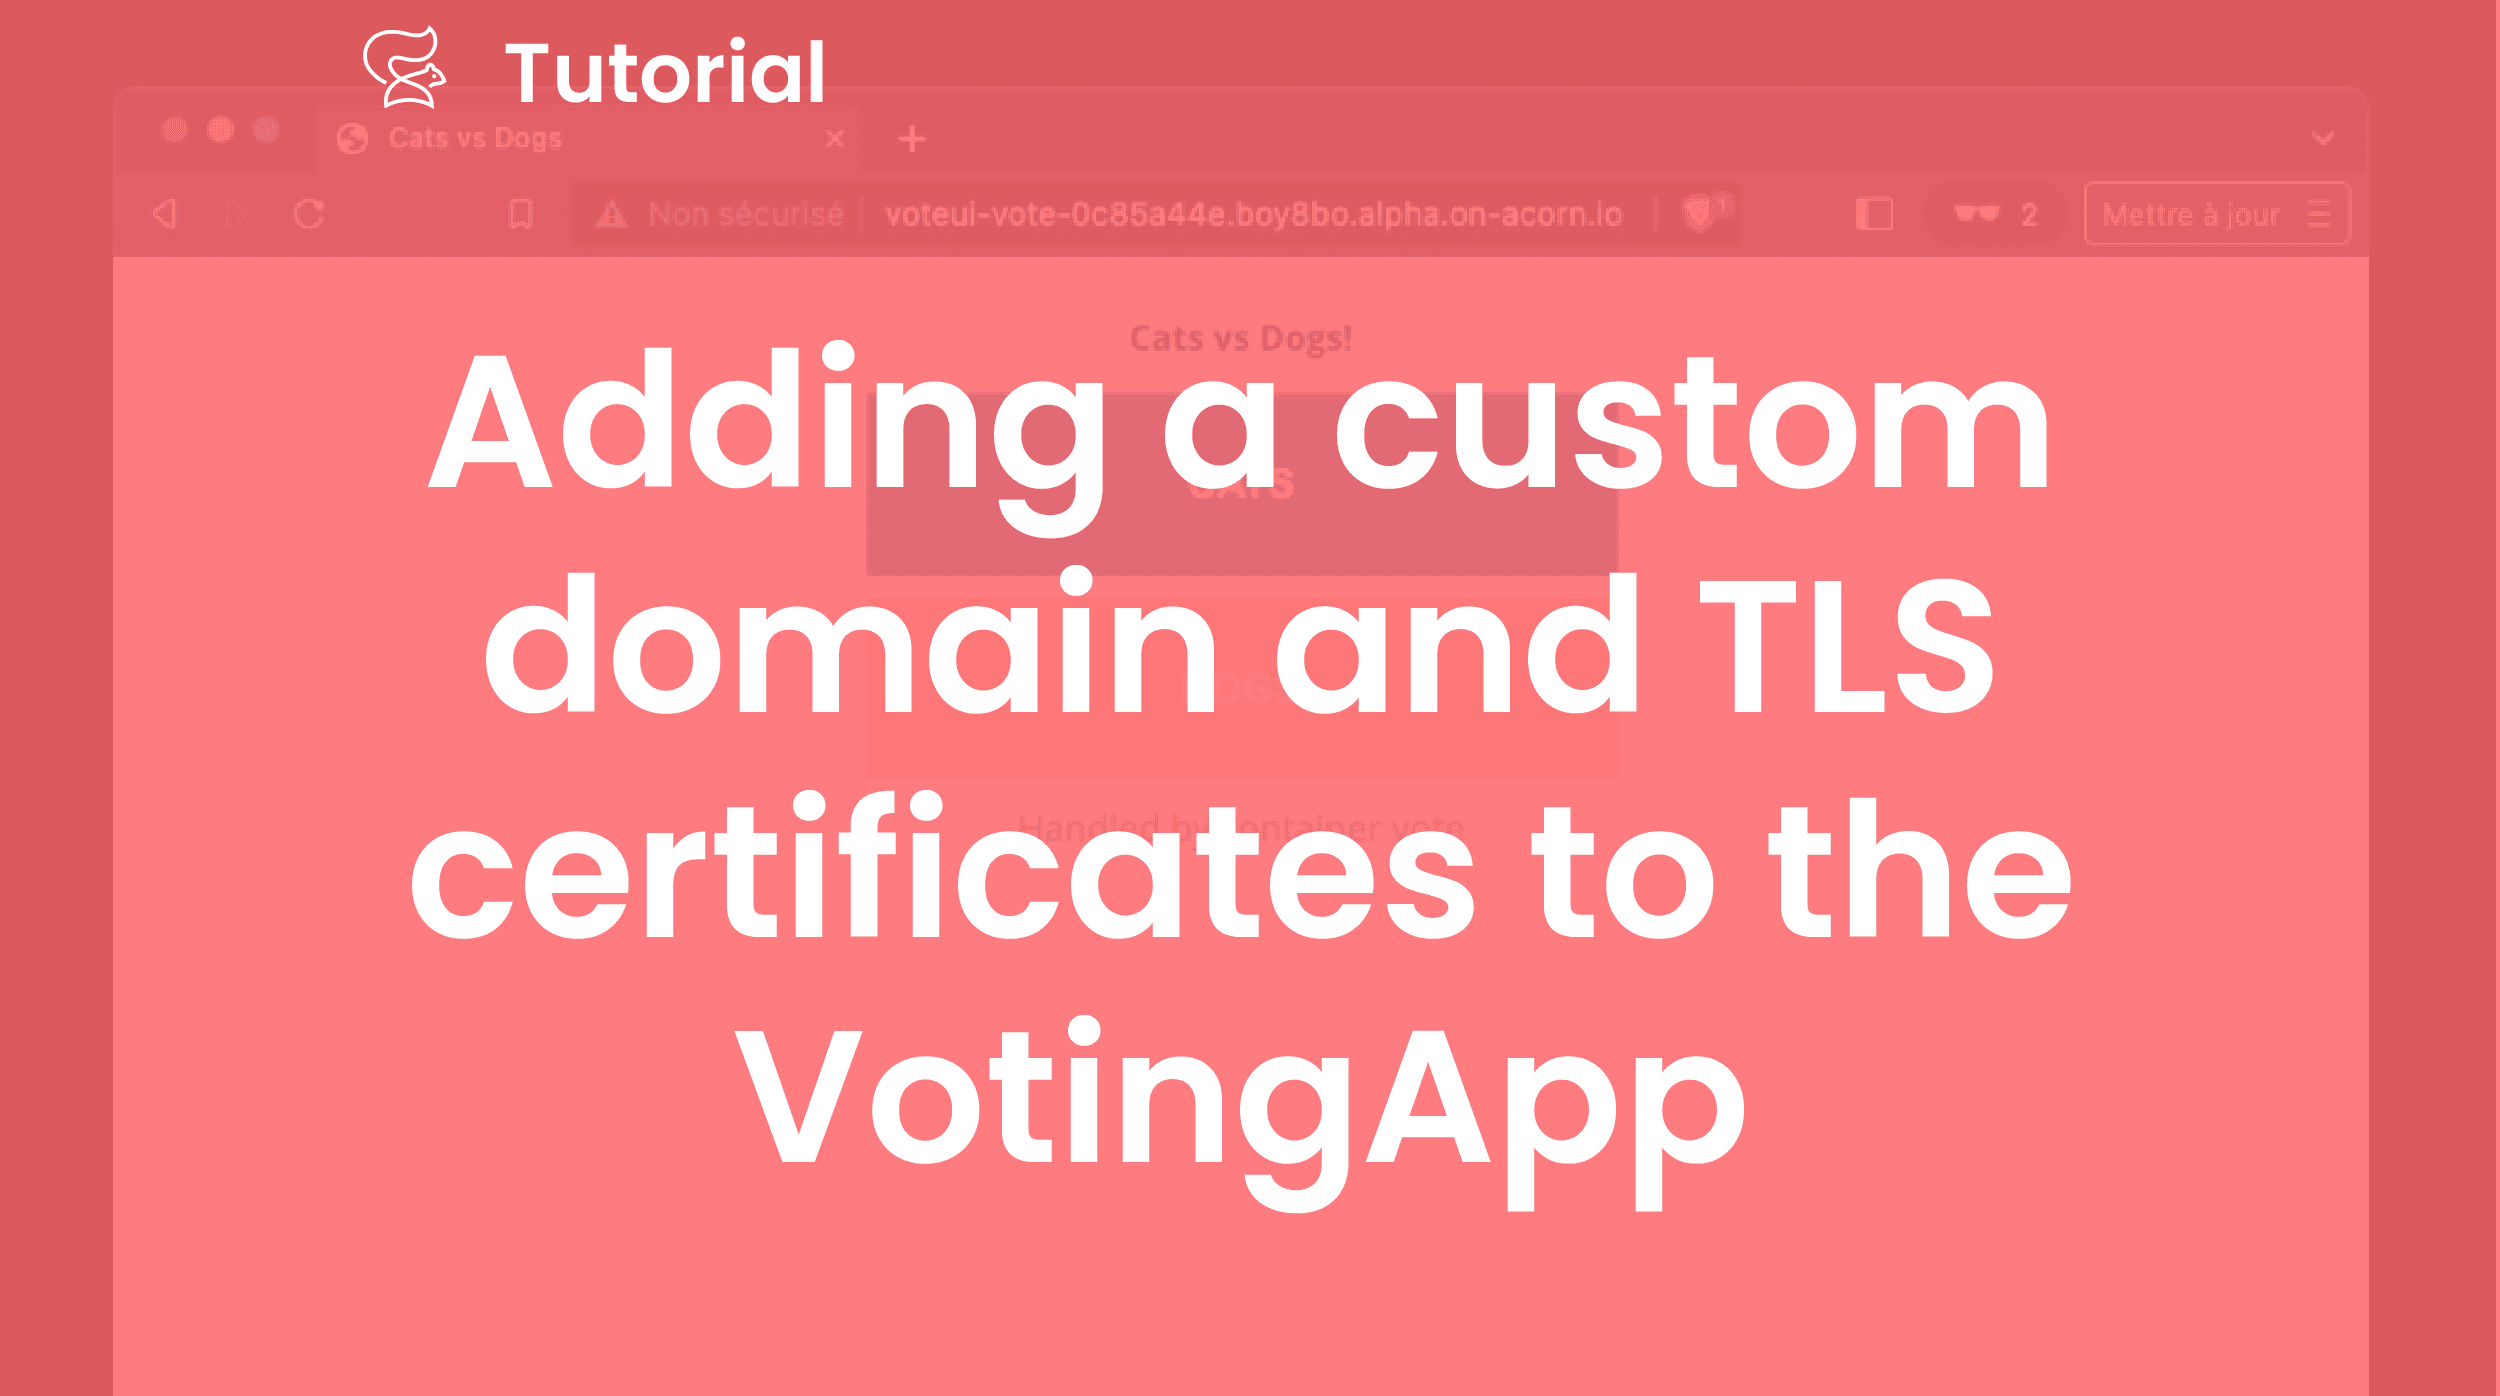 Adding a custom domain and TLS certificates to the VotingApp